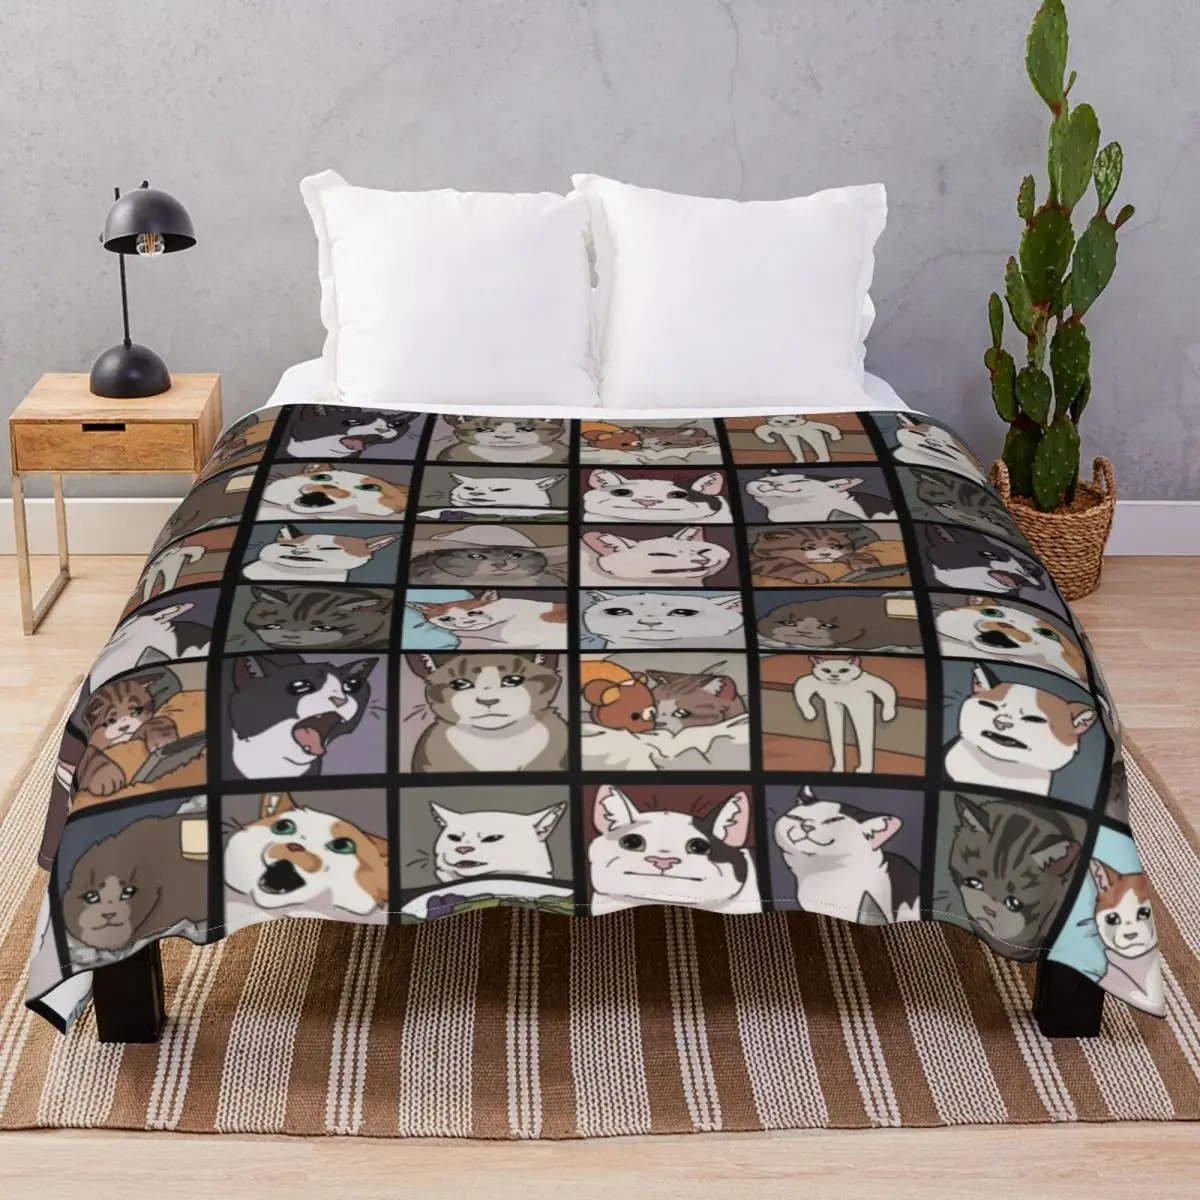 Meme Cats 2.0 Blanket Fleece Plush Decoration Soft Throw Blankets for Bed Home Couch Travel Office